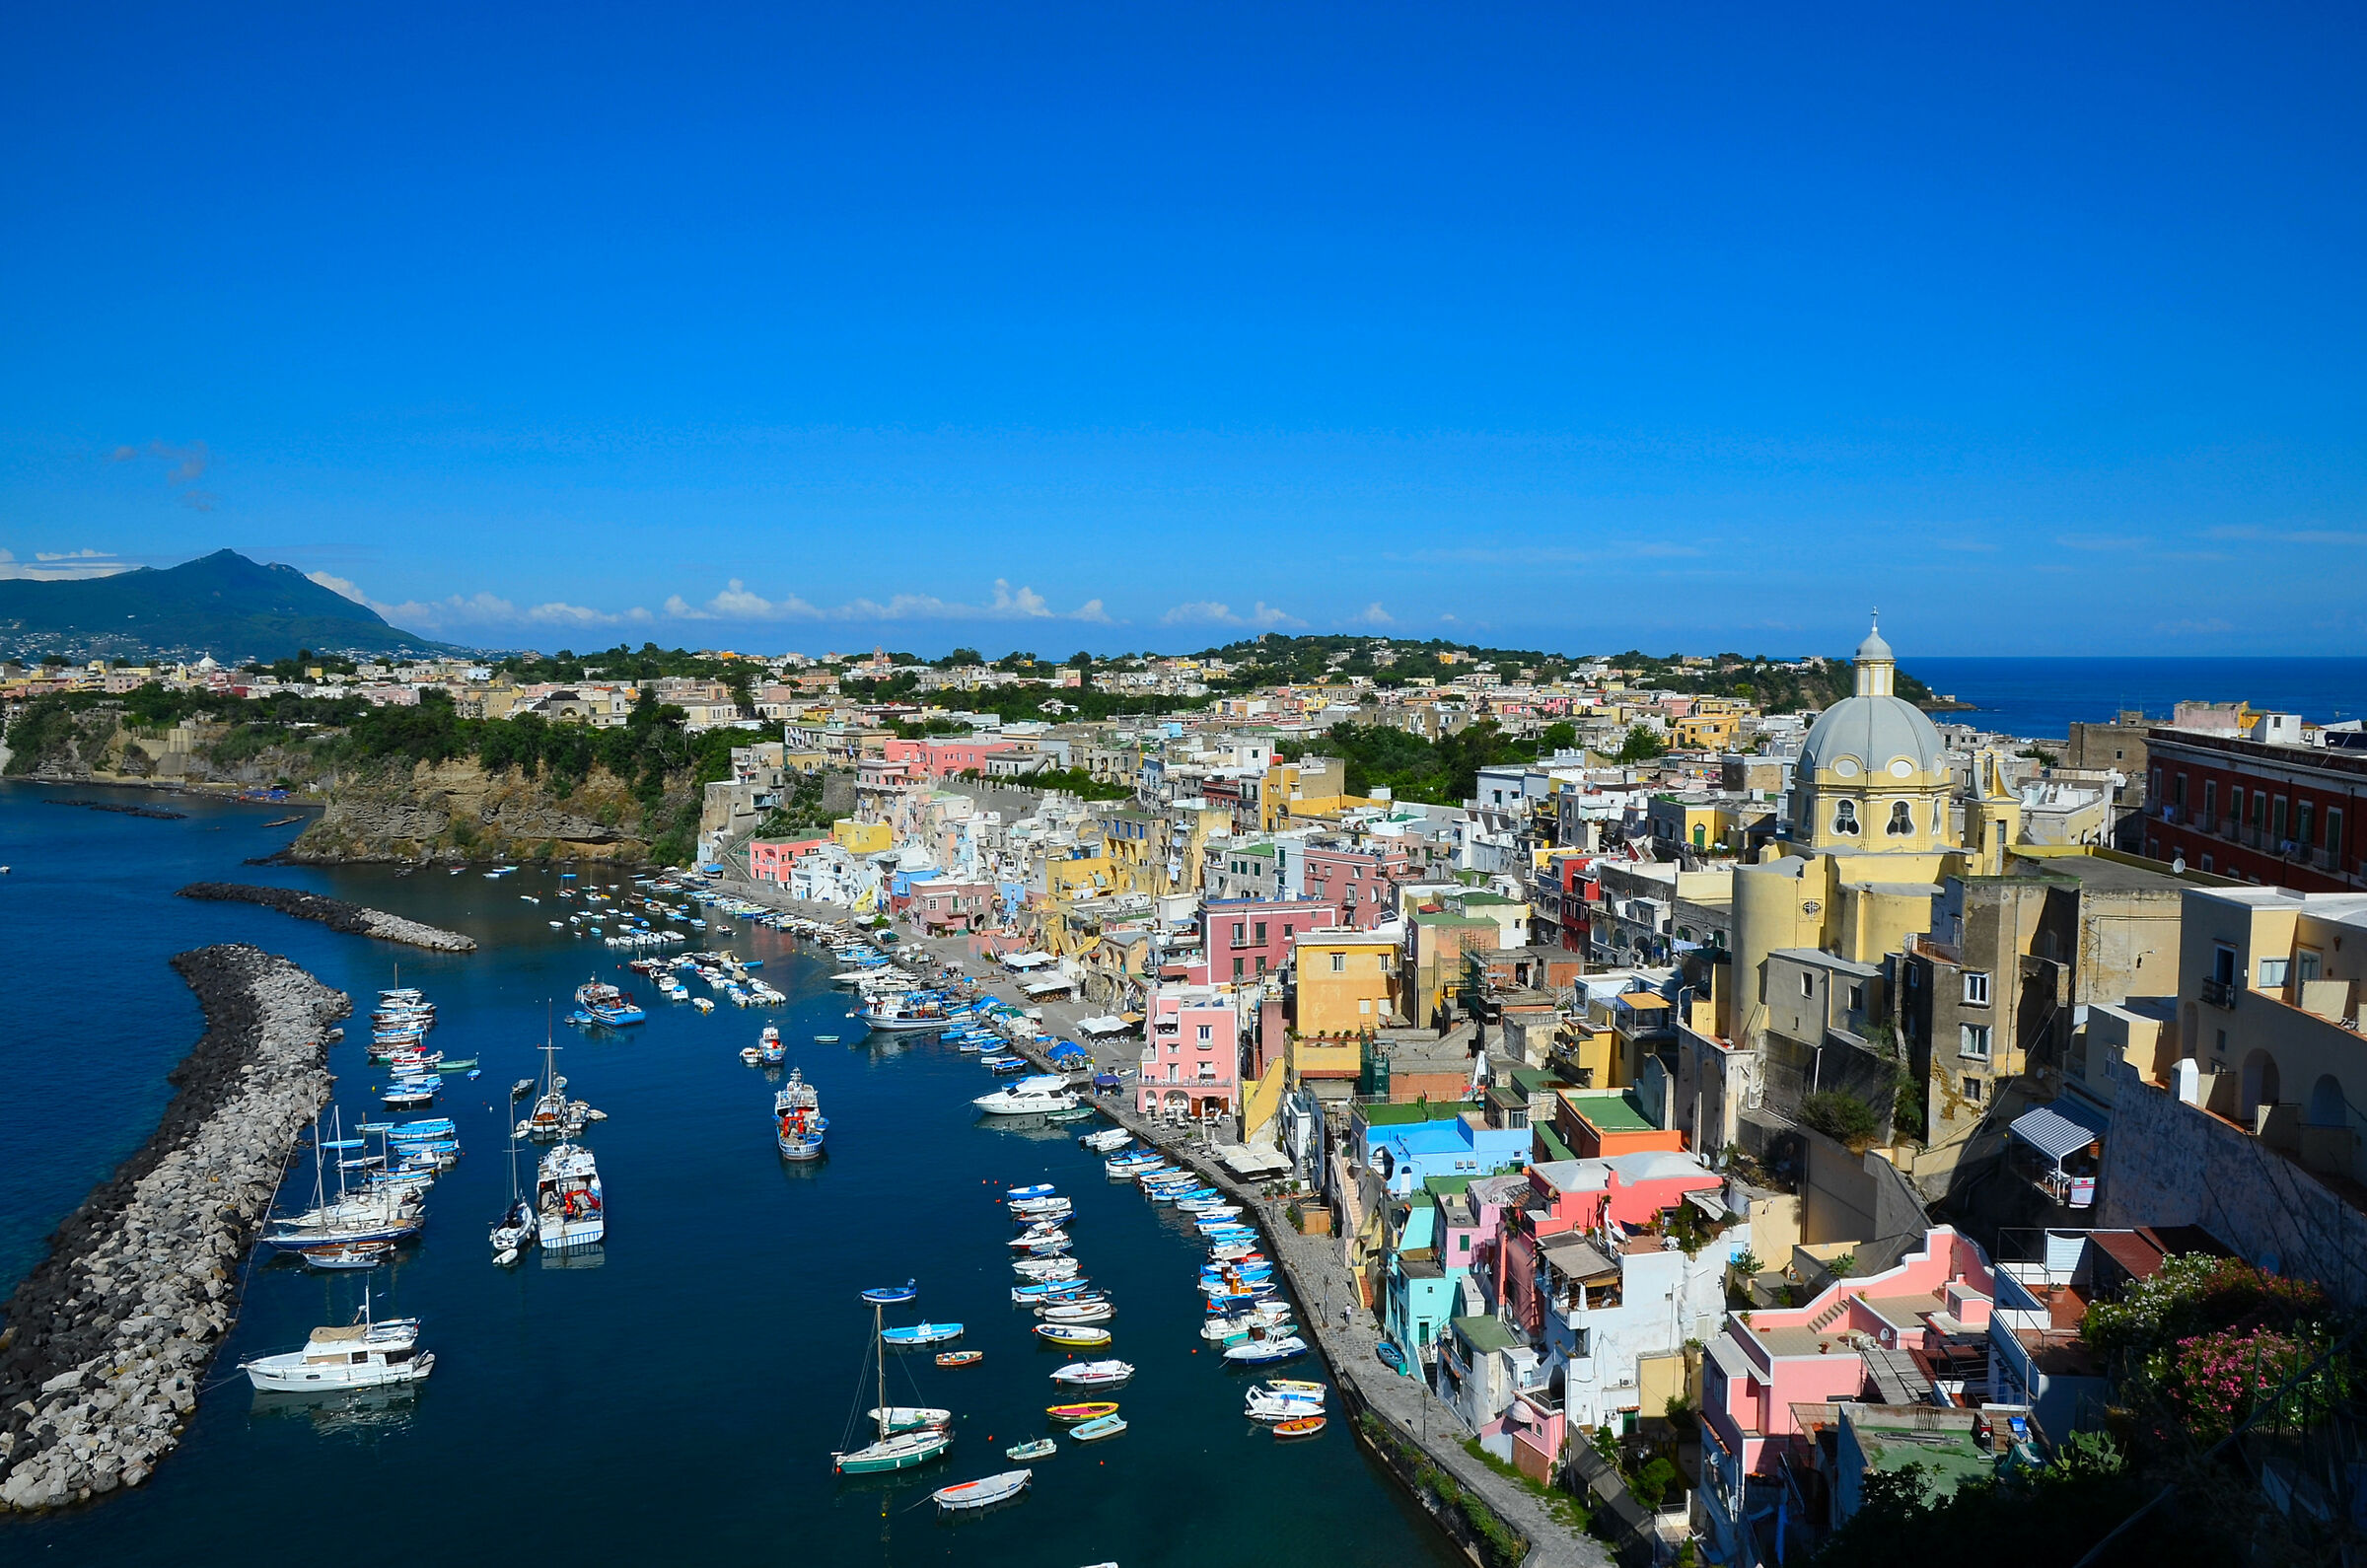 Procida and its colors...